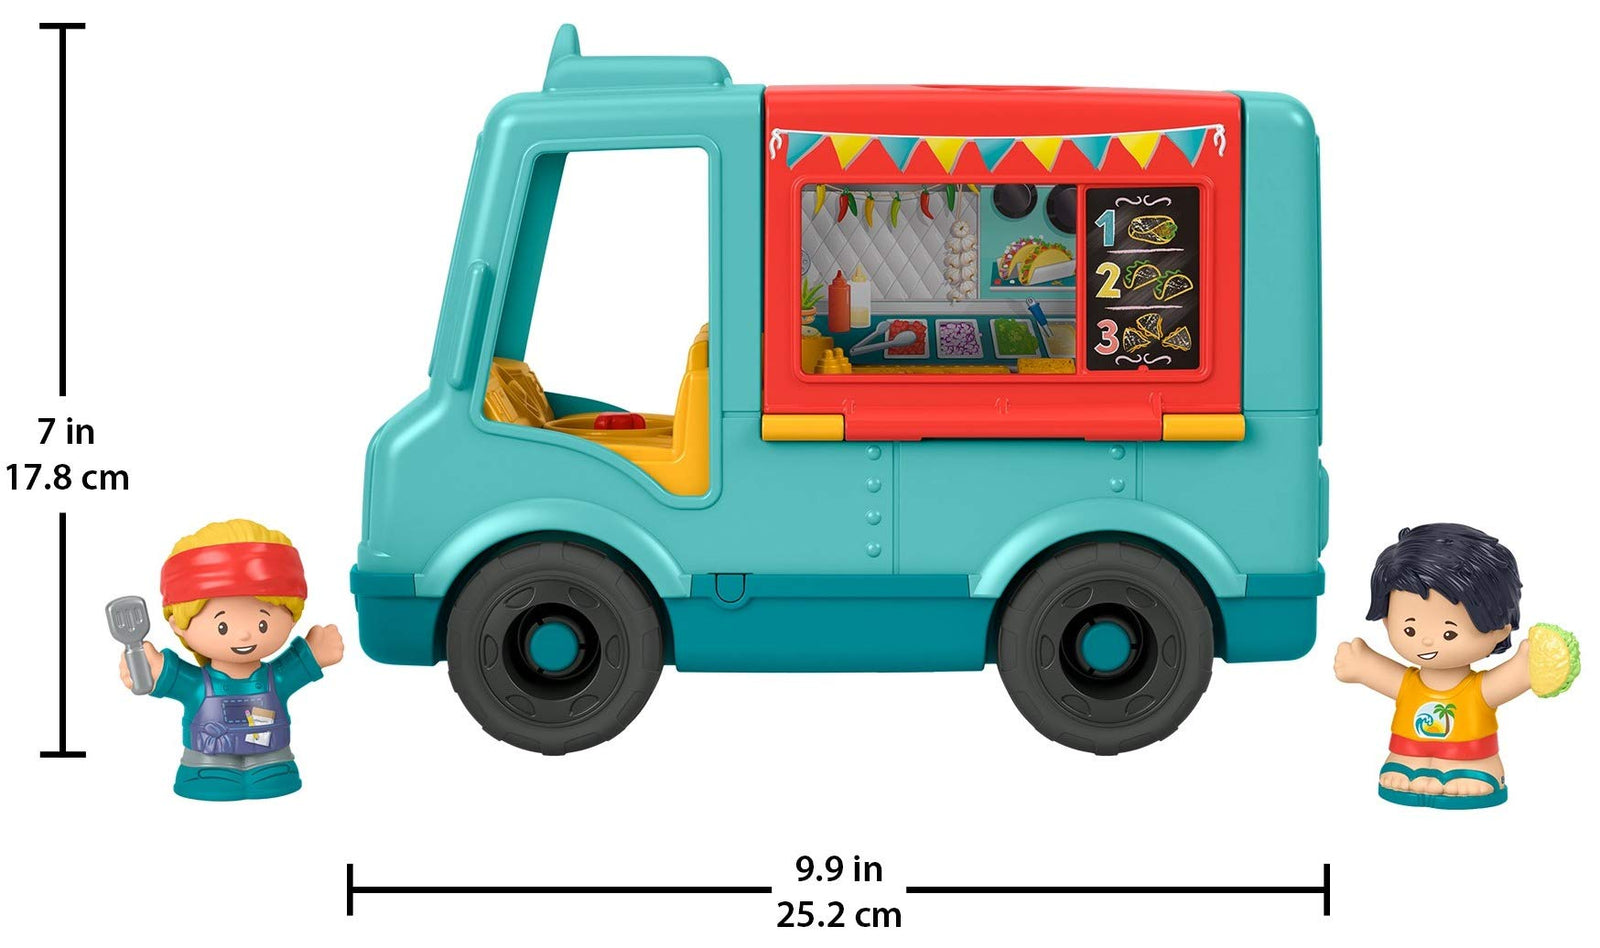 Fisher-Price Little People Serve It Up Food Truck, Push-Along Musical Toy Vehicle with Figures for Toddlers and Preschool Kids Ages 1-5 Years